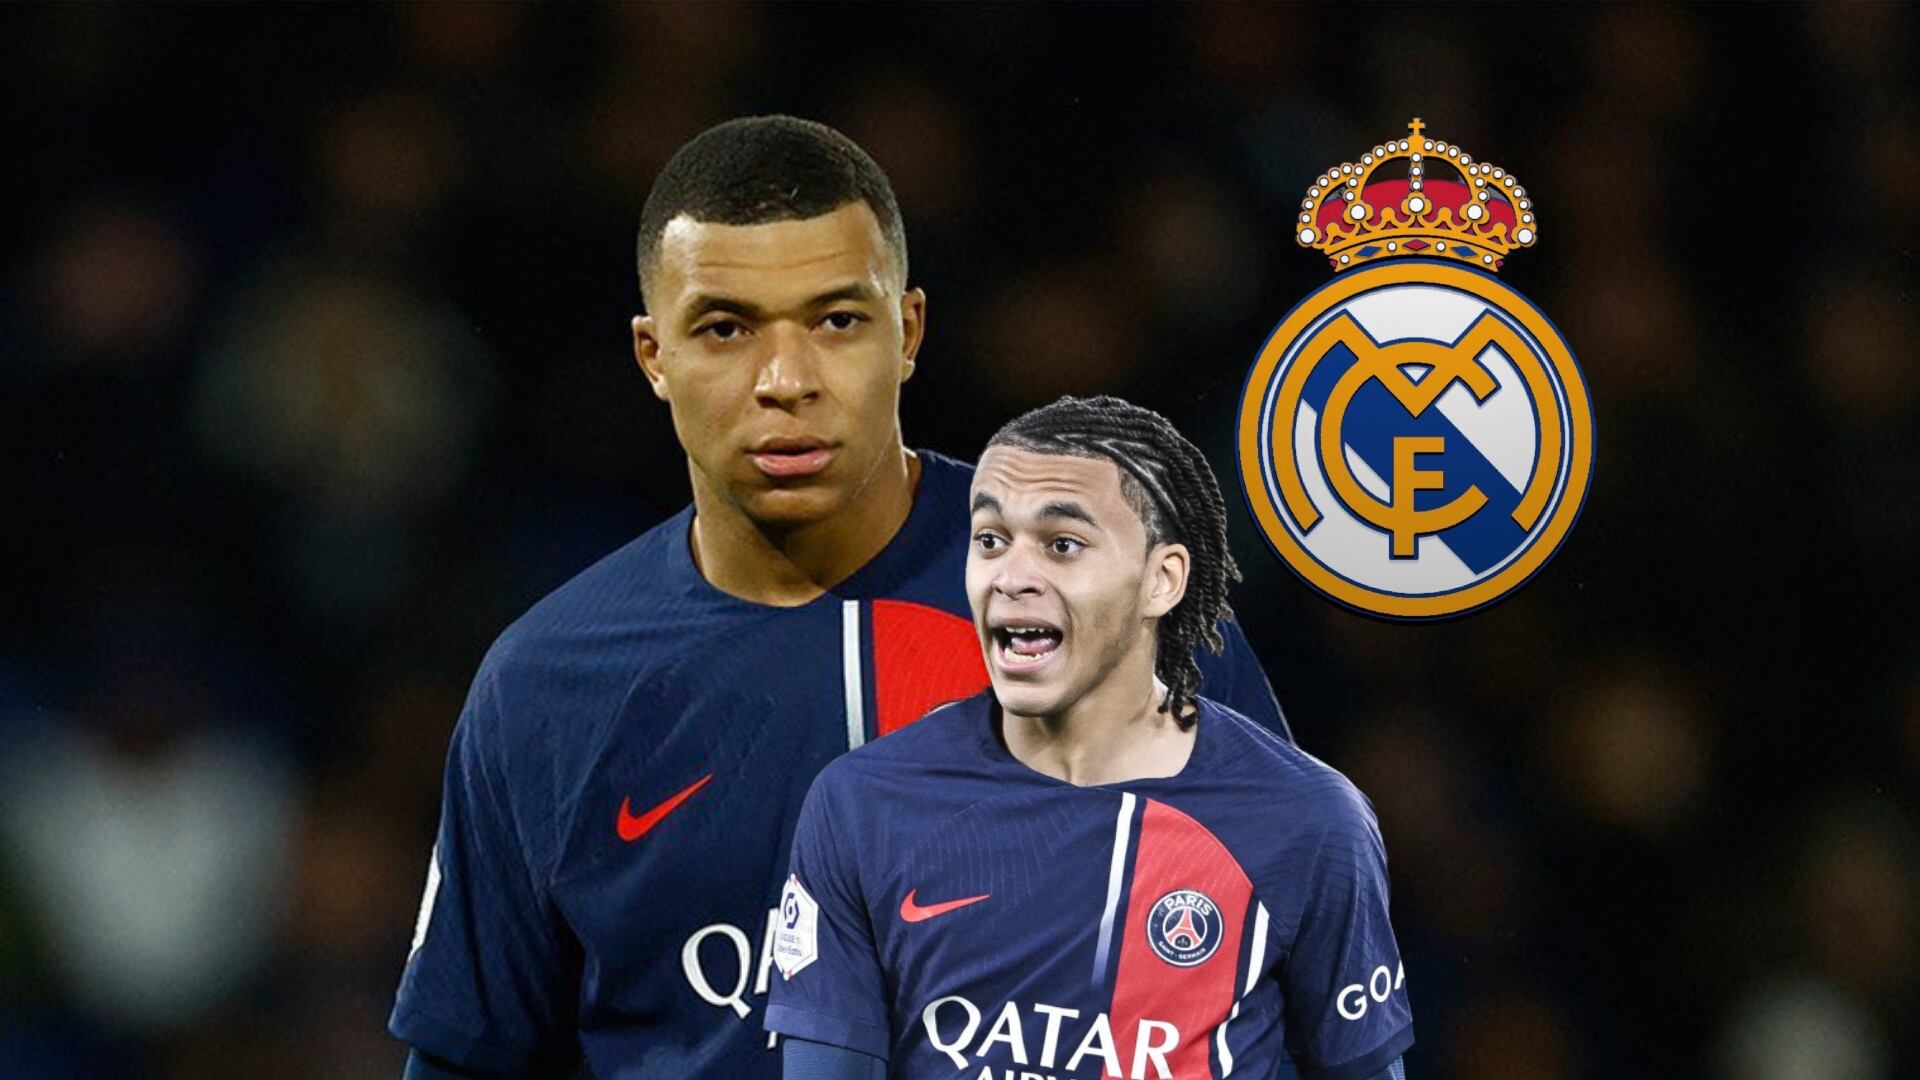 The new confirmation of Kylian Mbappé to Real Madrid, what his brother said that excites the fans